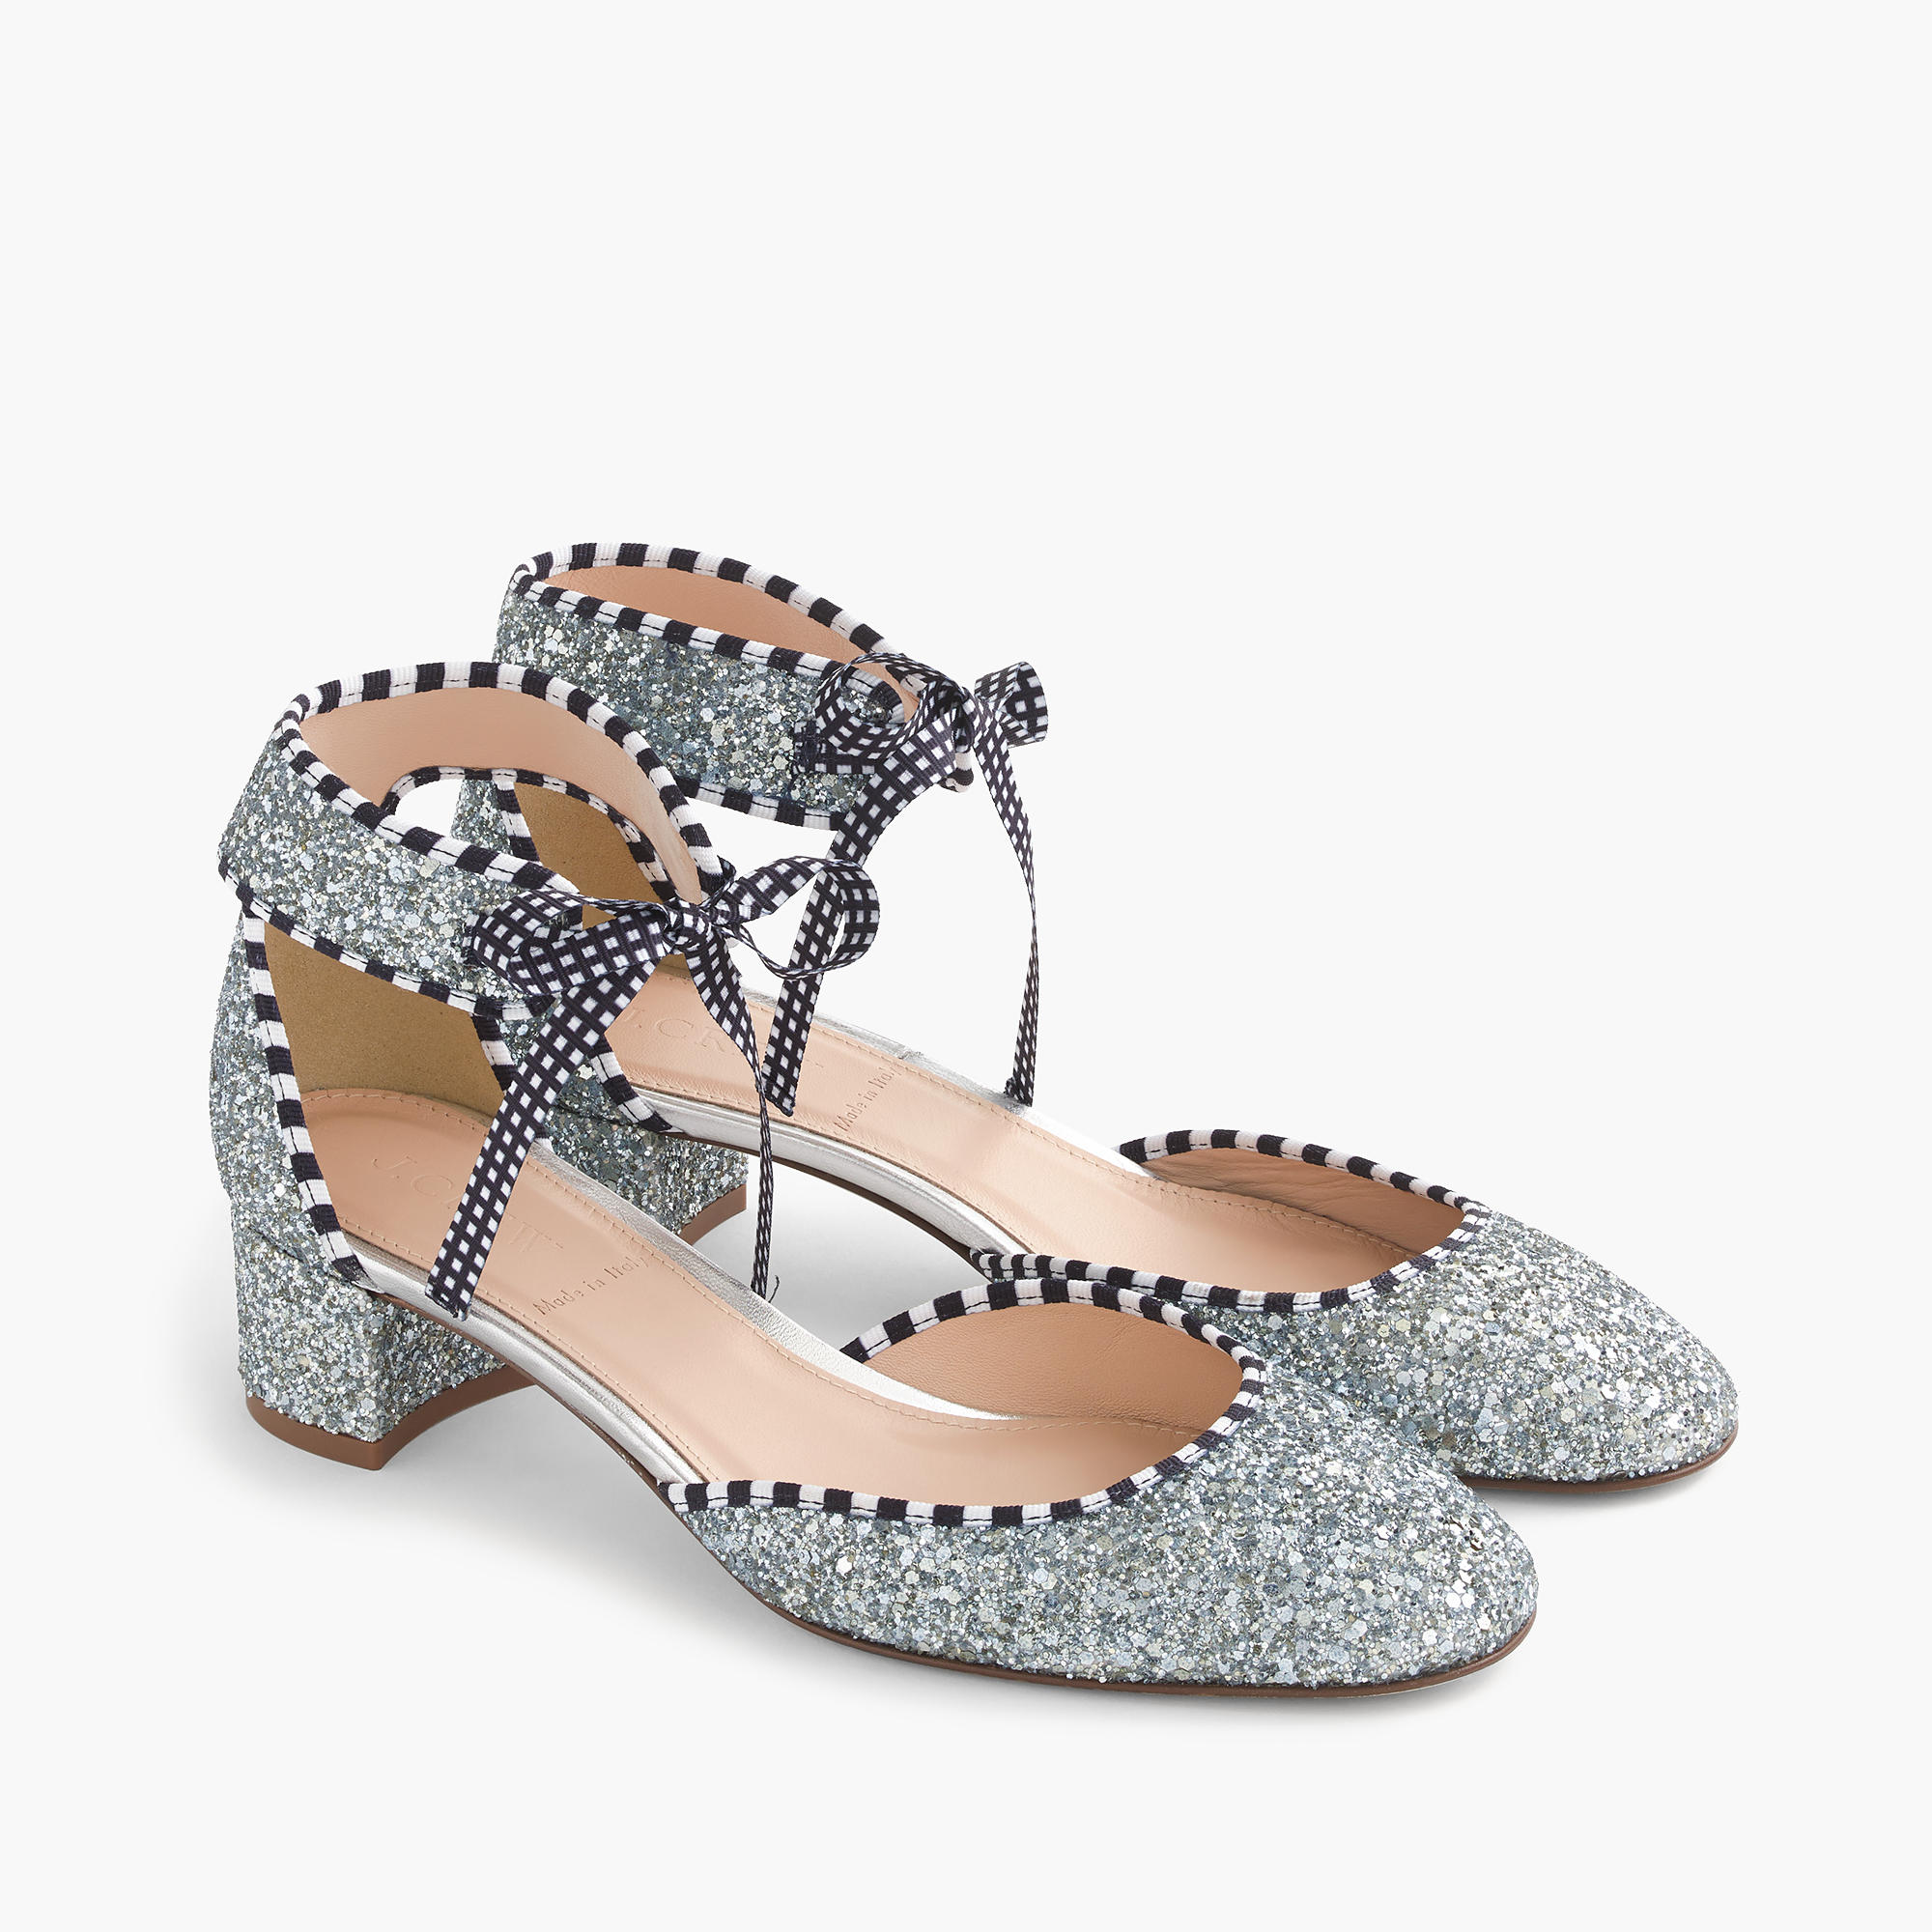 The 10 Prettiest Spring Shoes at J.Crew Right Now. Click through for the details. | glitterinc.com | @glitterinc